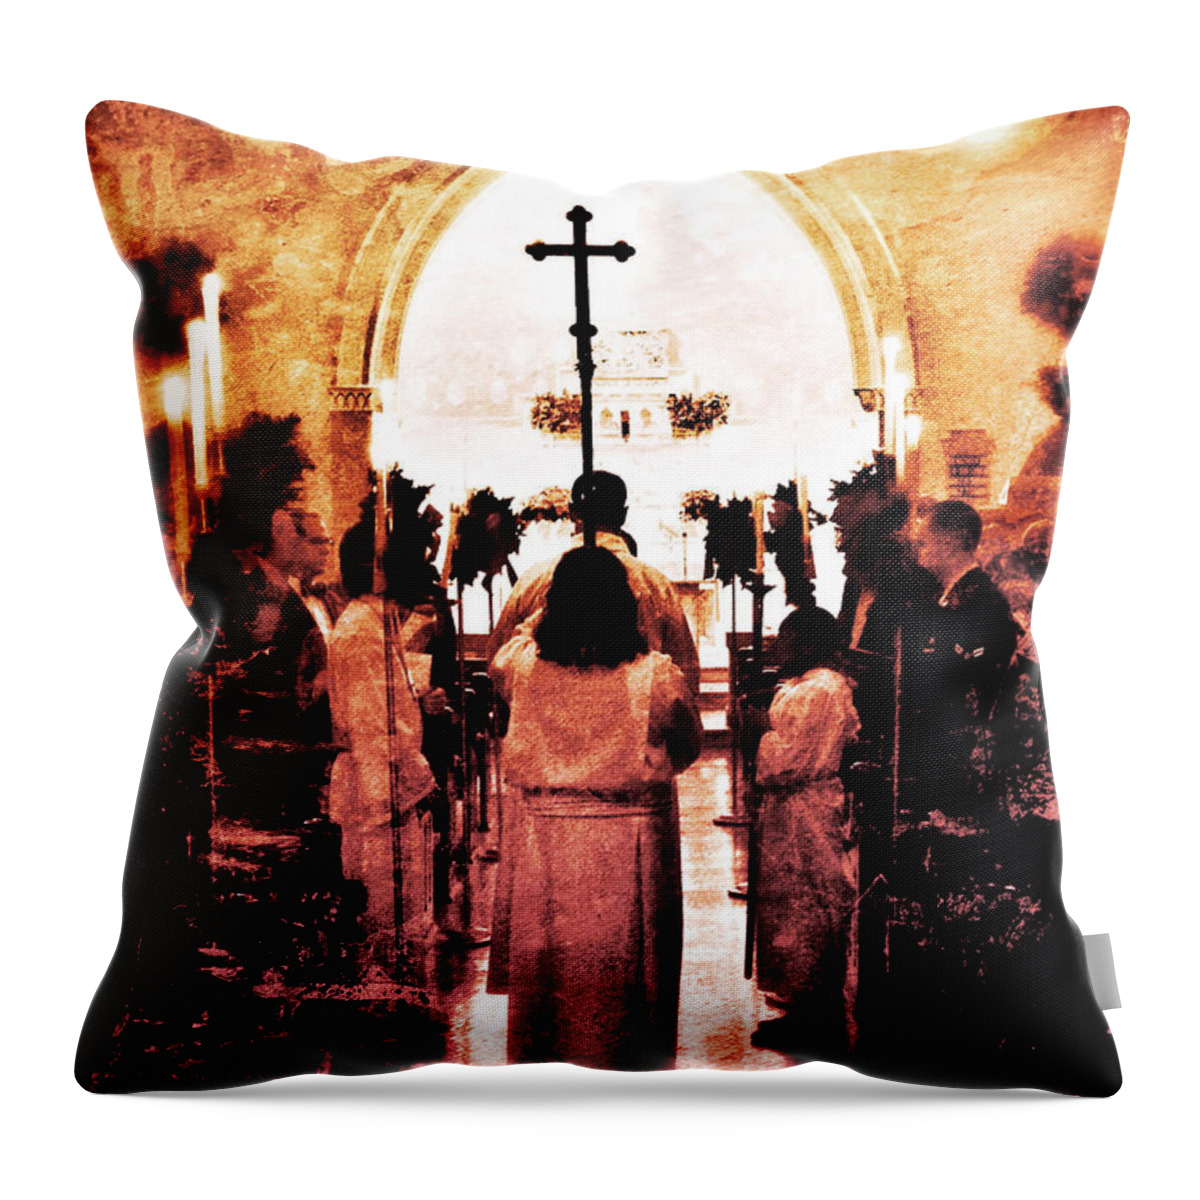 Christmas Throw Pillow featuring the digital art Procession Of Light by Kevyn Bashore